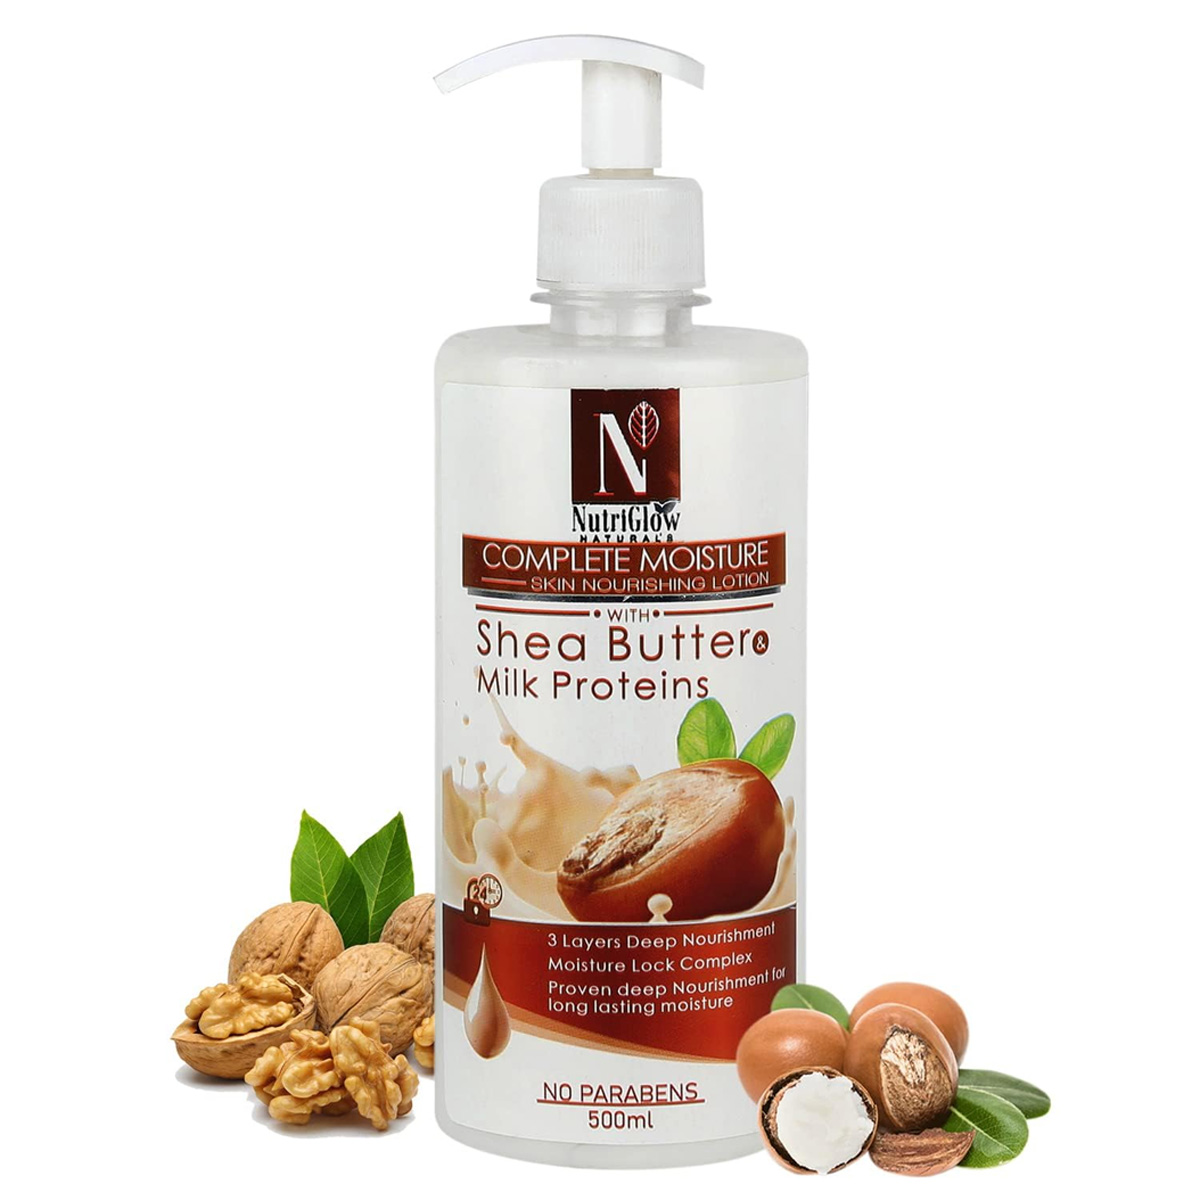 Nutriglow Natural's Complete Moisture Skin Nourishing Lotion With Shea Butter & Milk Proteins, 500ml